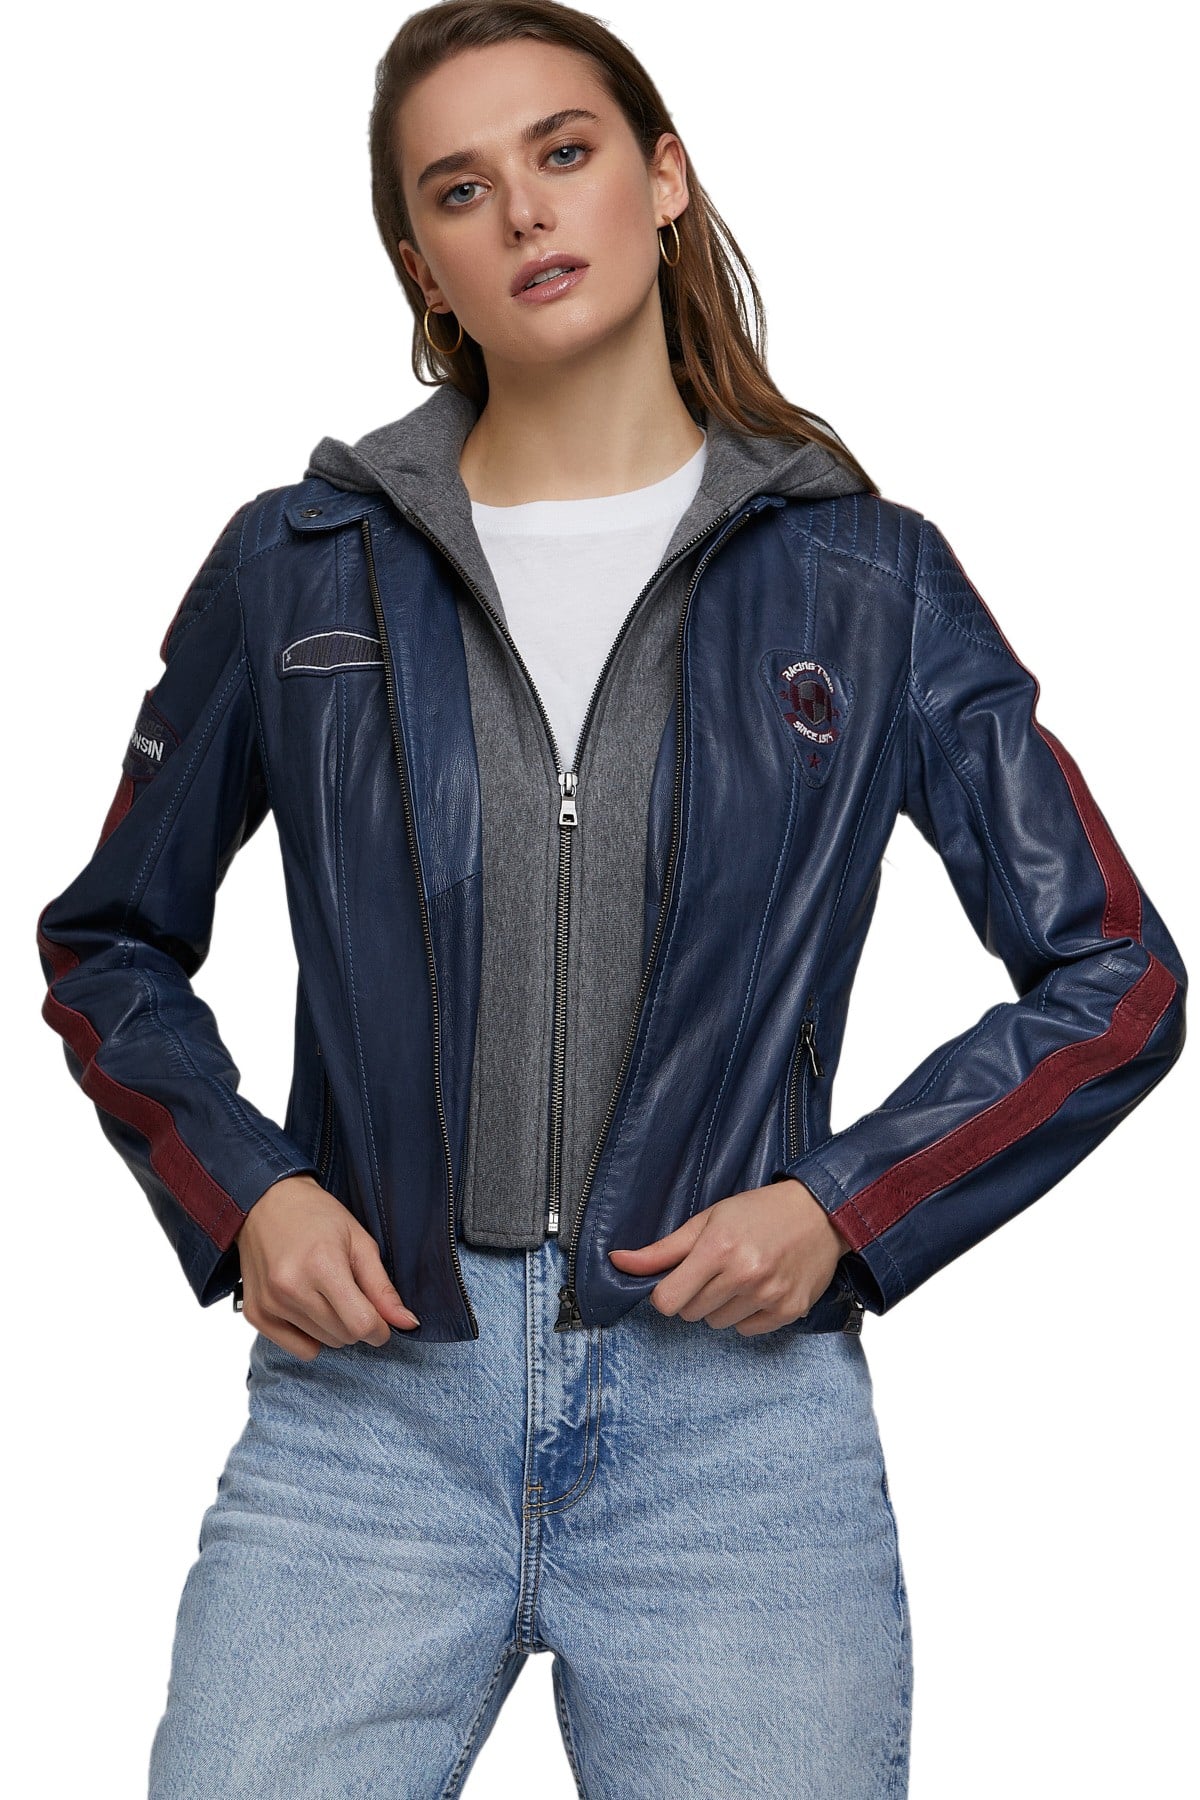 Cindy Kimberly Women's 100 % Real Navy-Blue Leather Hooded Style Jacket